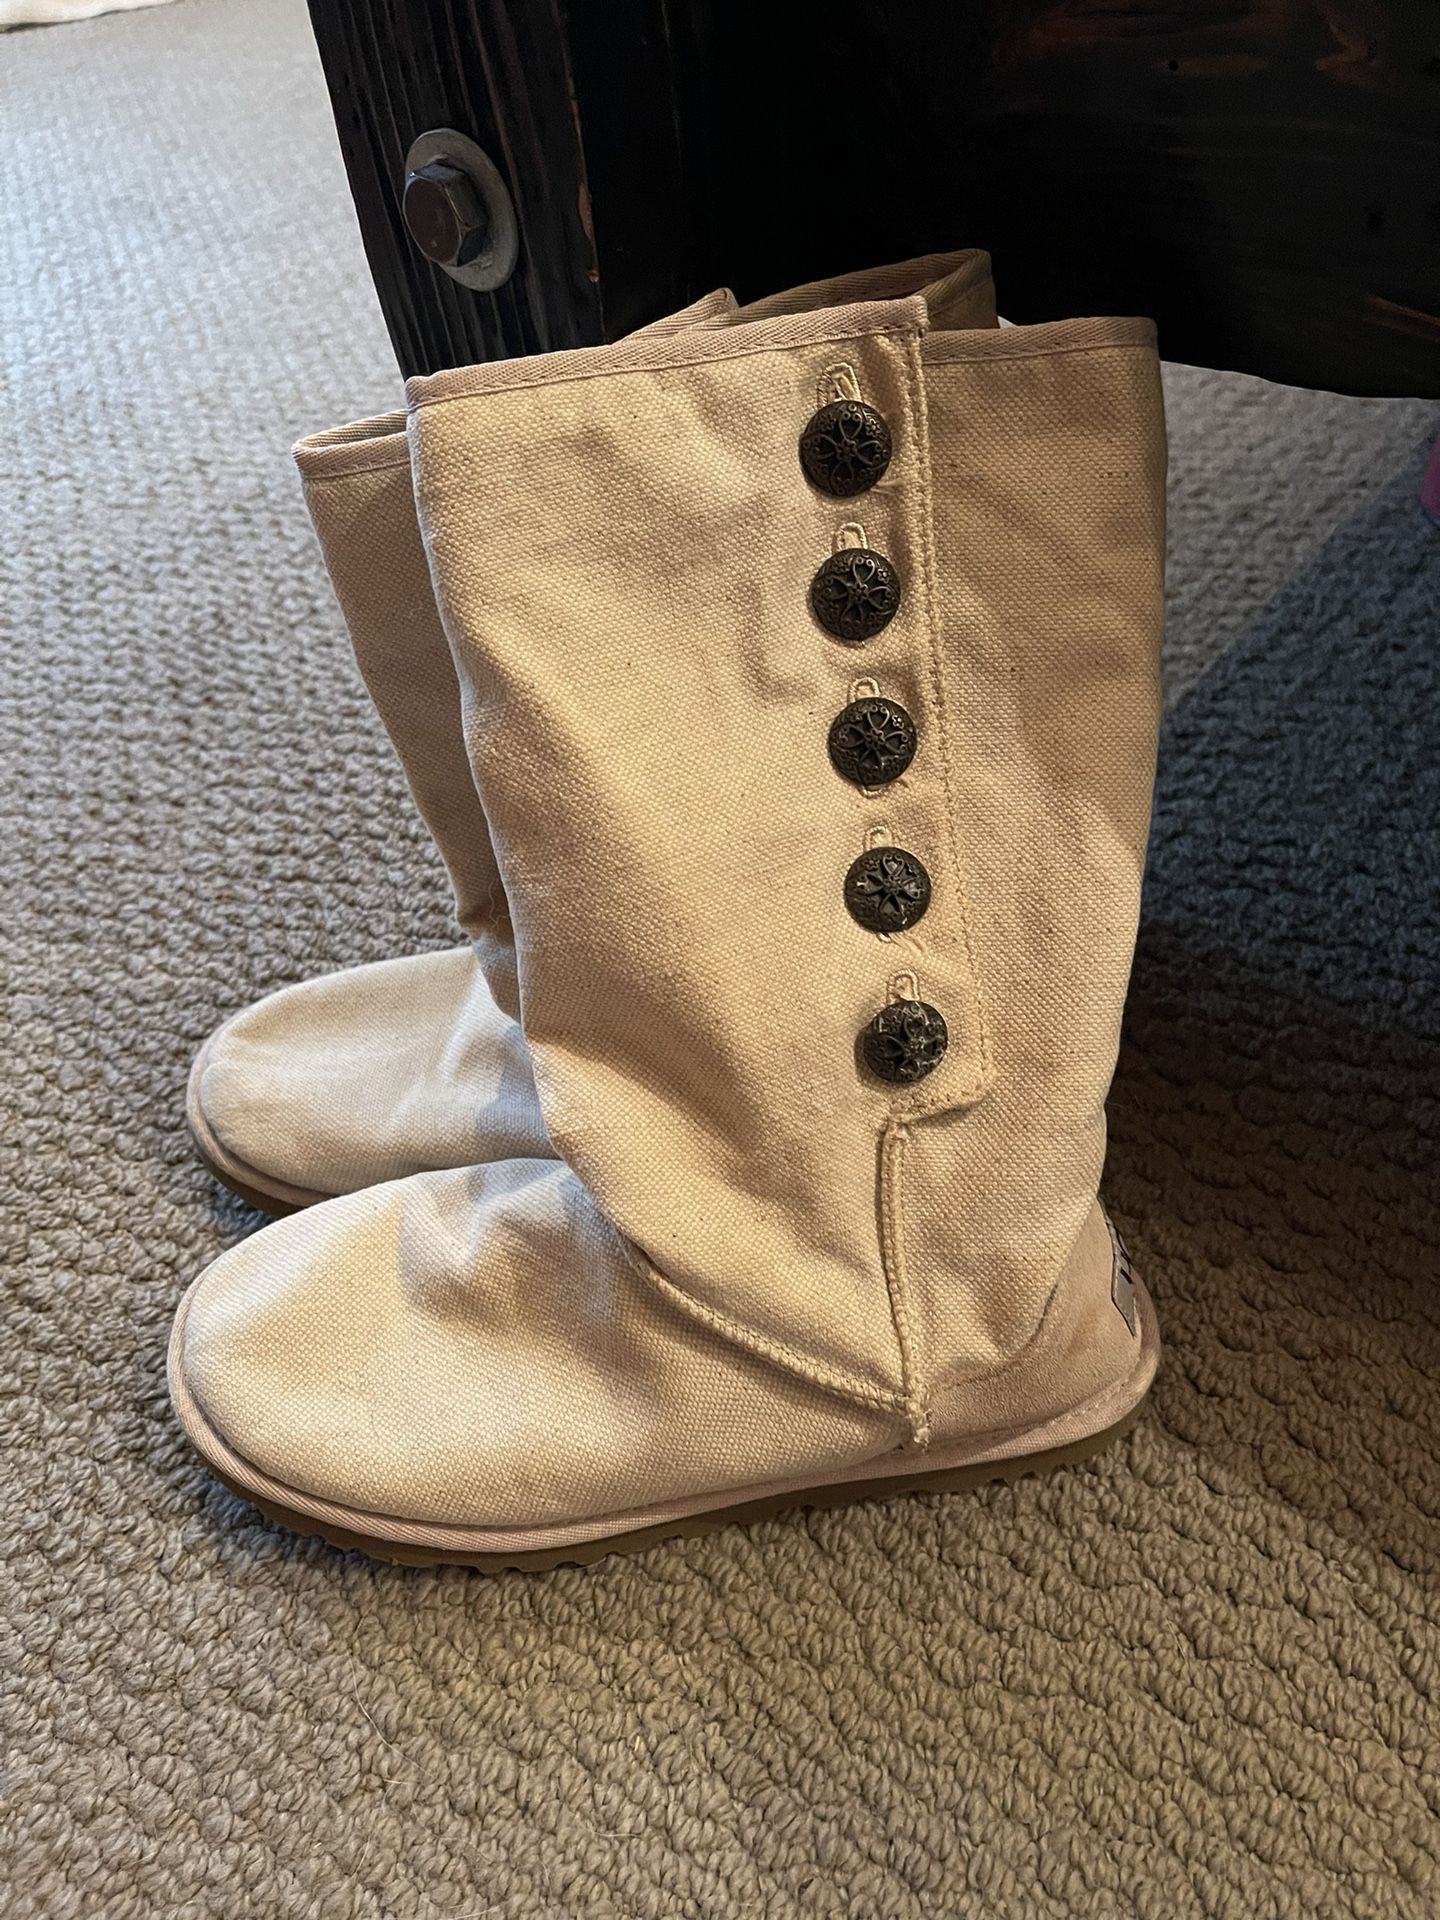 UGGS!! Great Condition Size 7